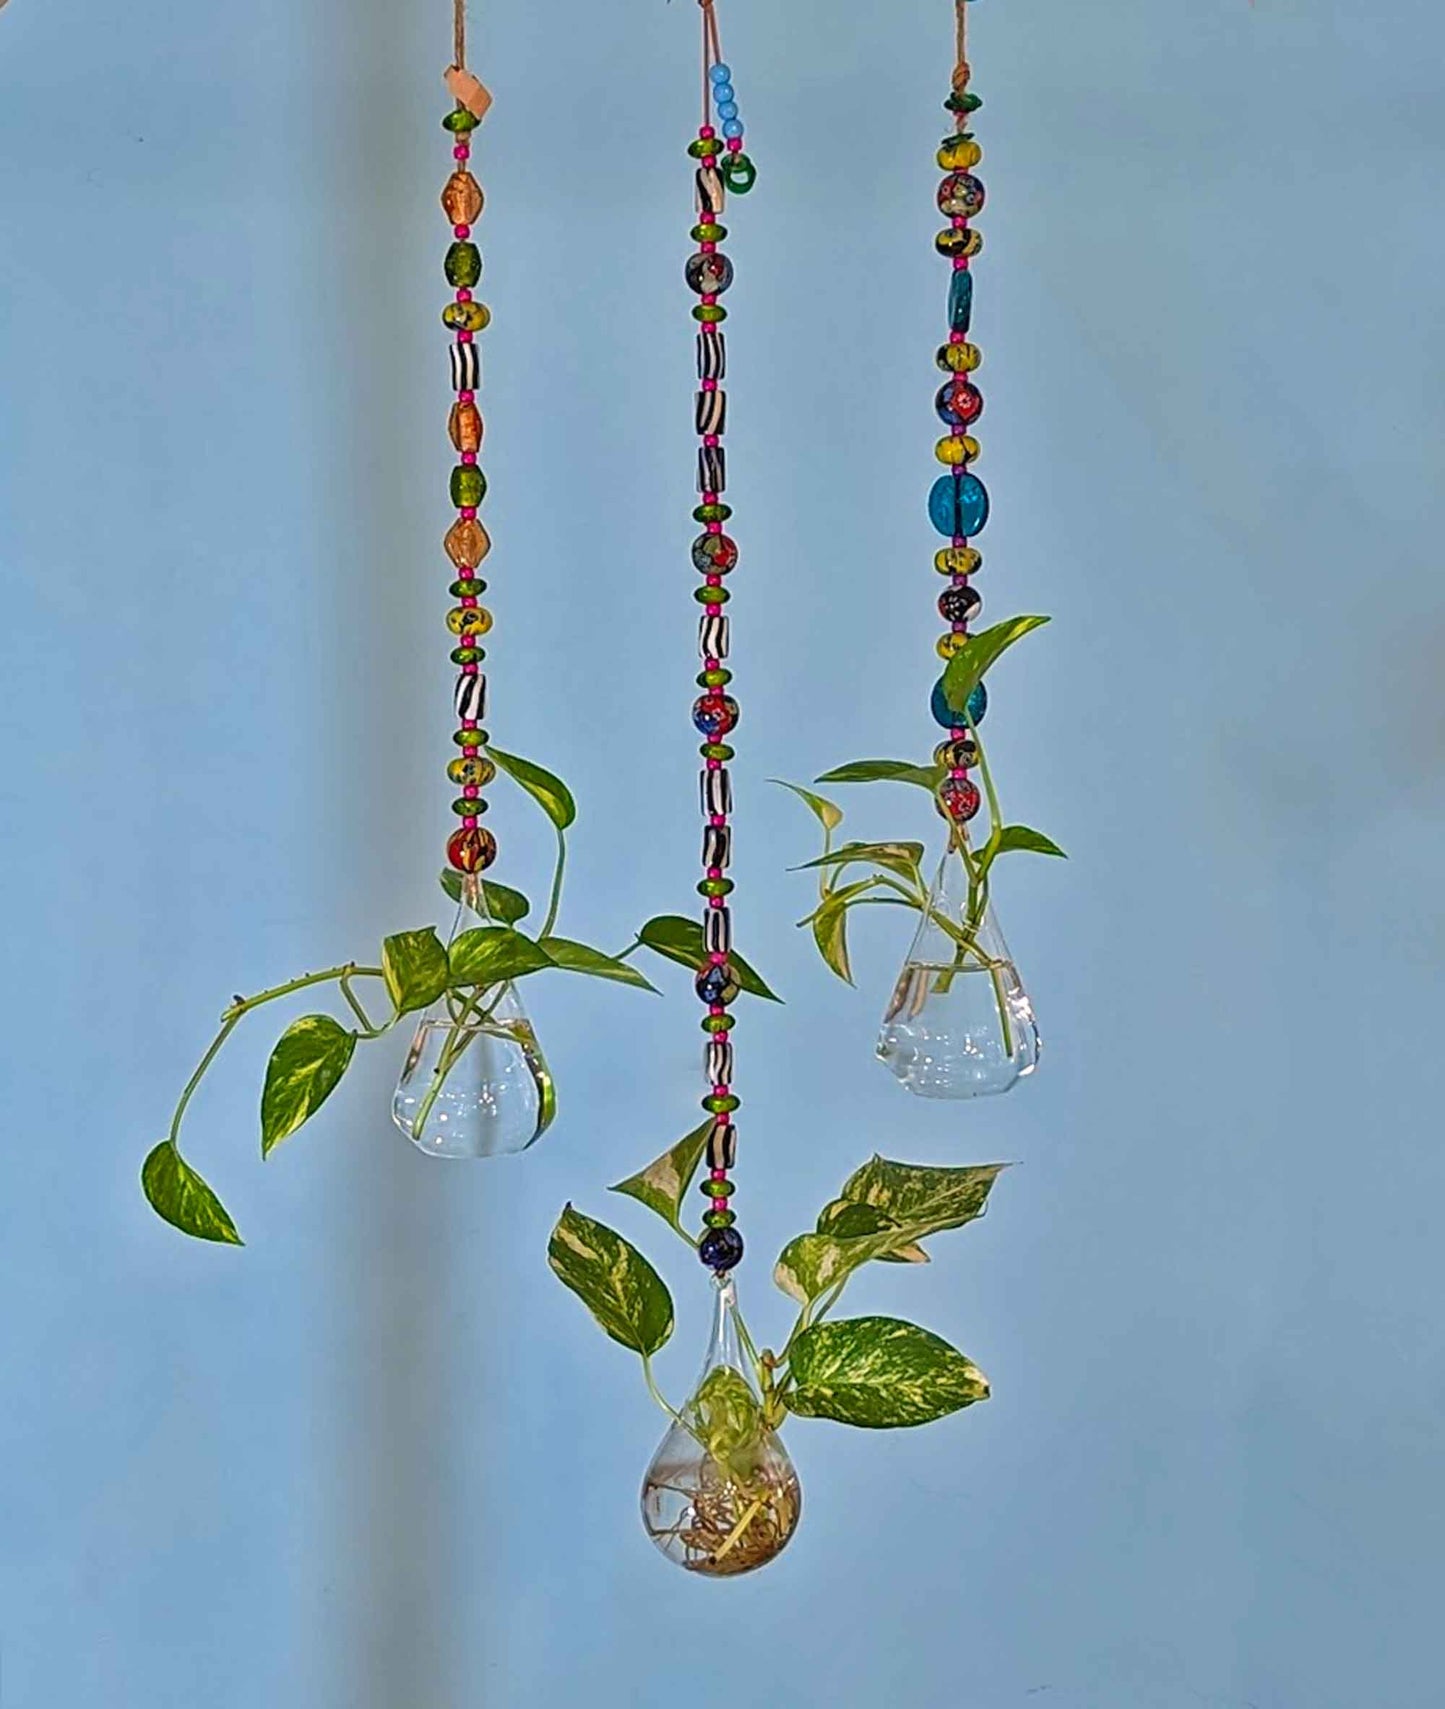 Boho Chic Eclectic Glass Vase Hanging on Colorful Glass Bead Chain